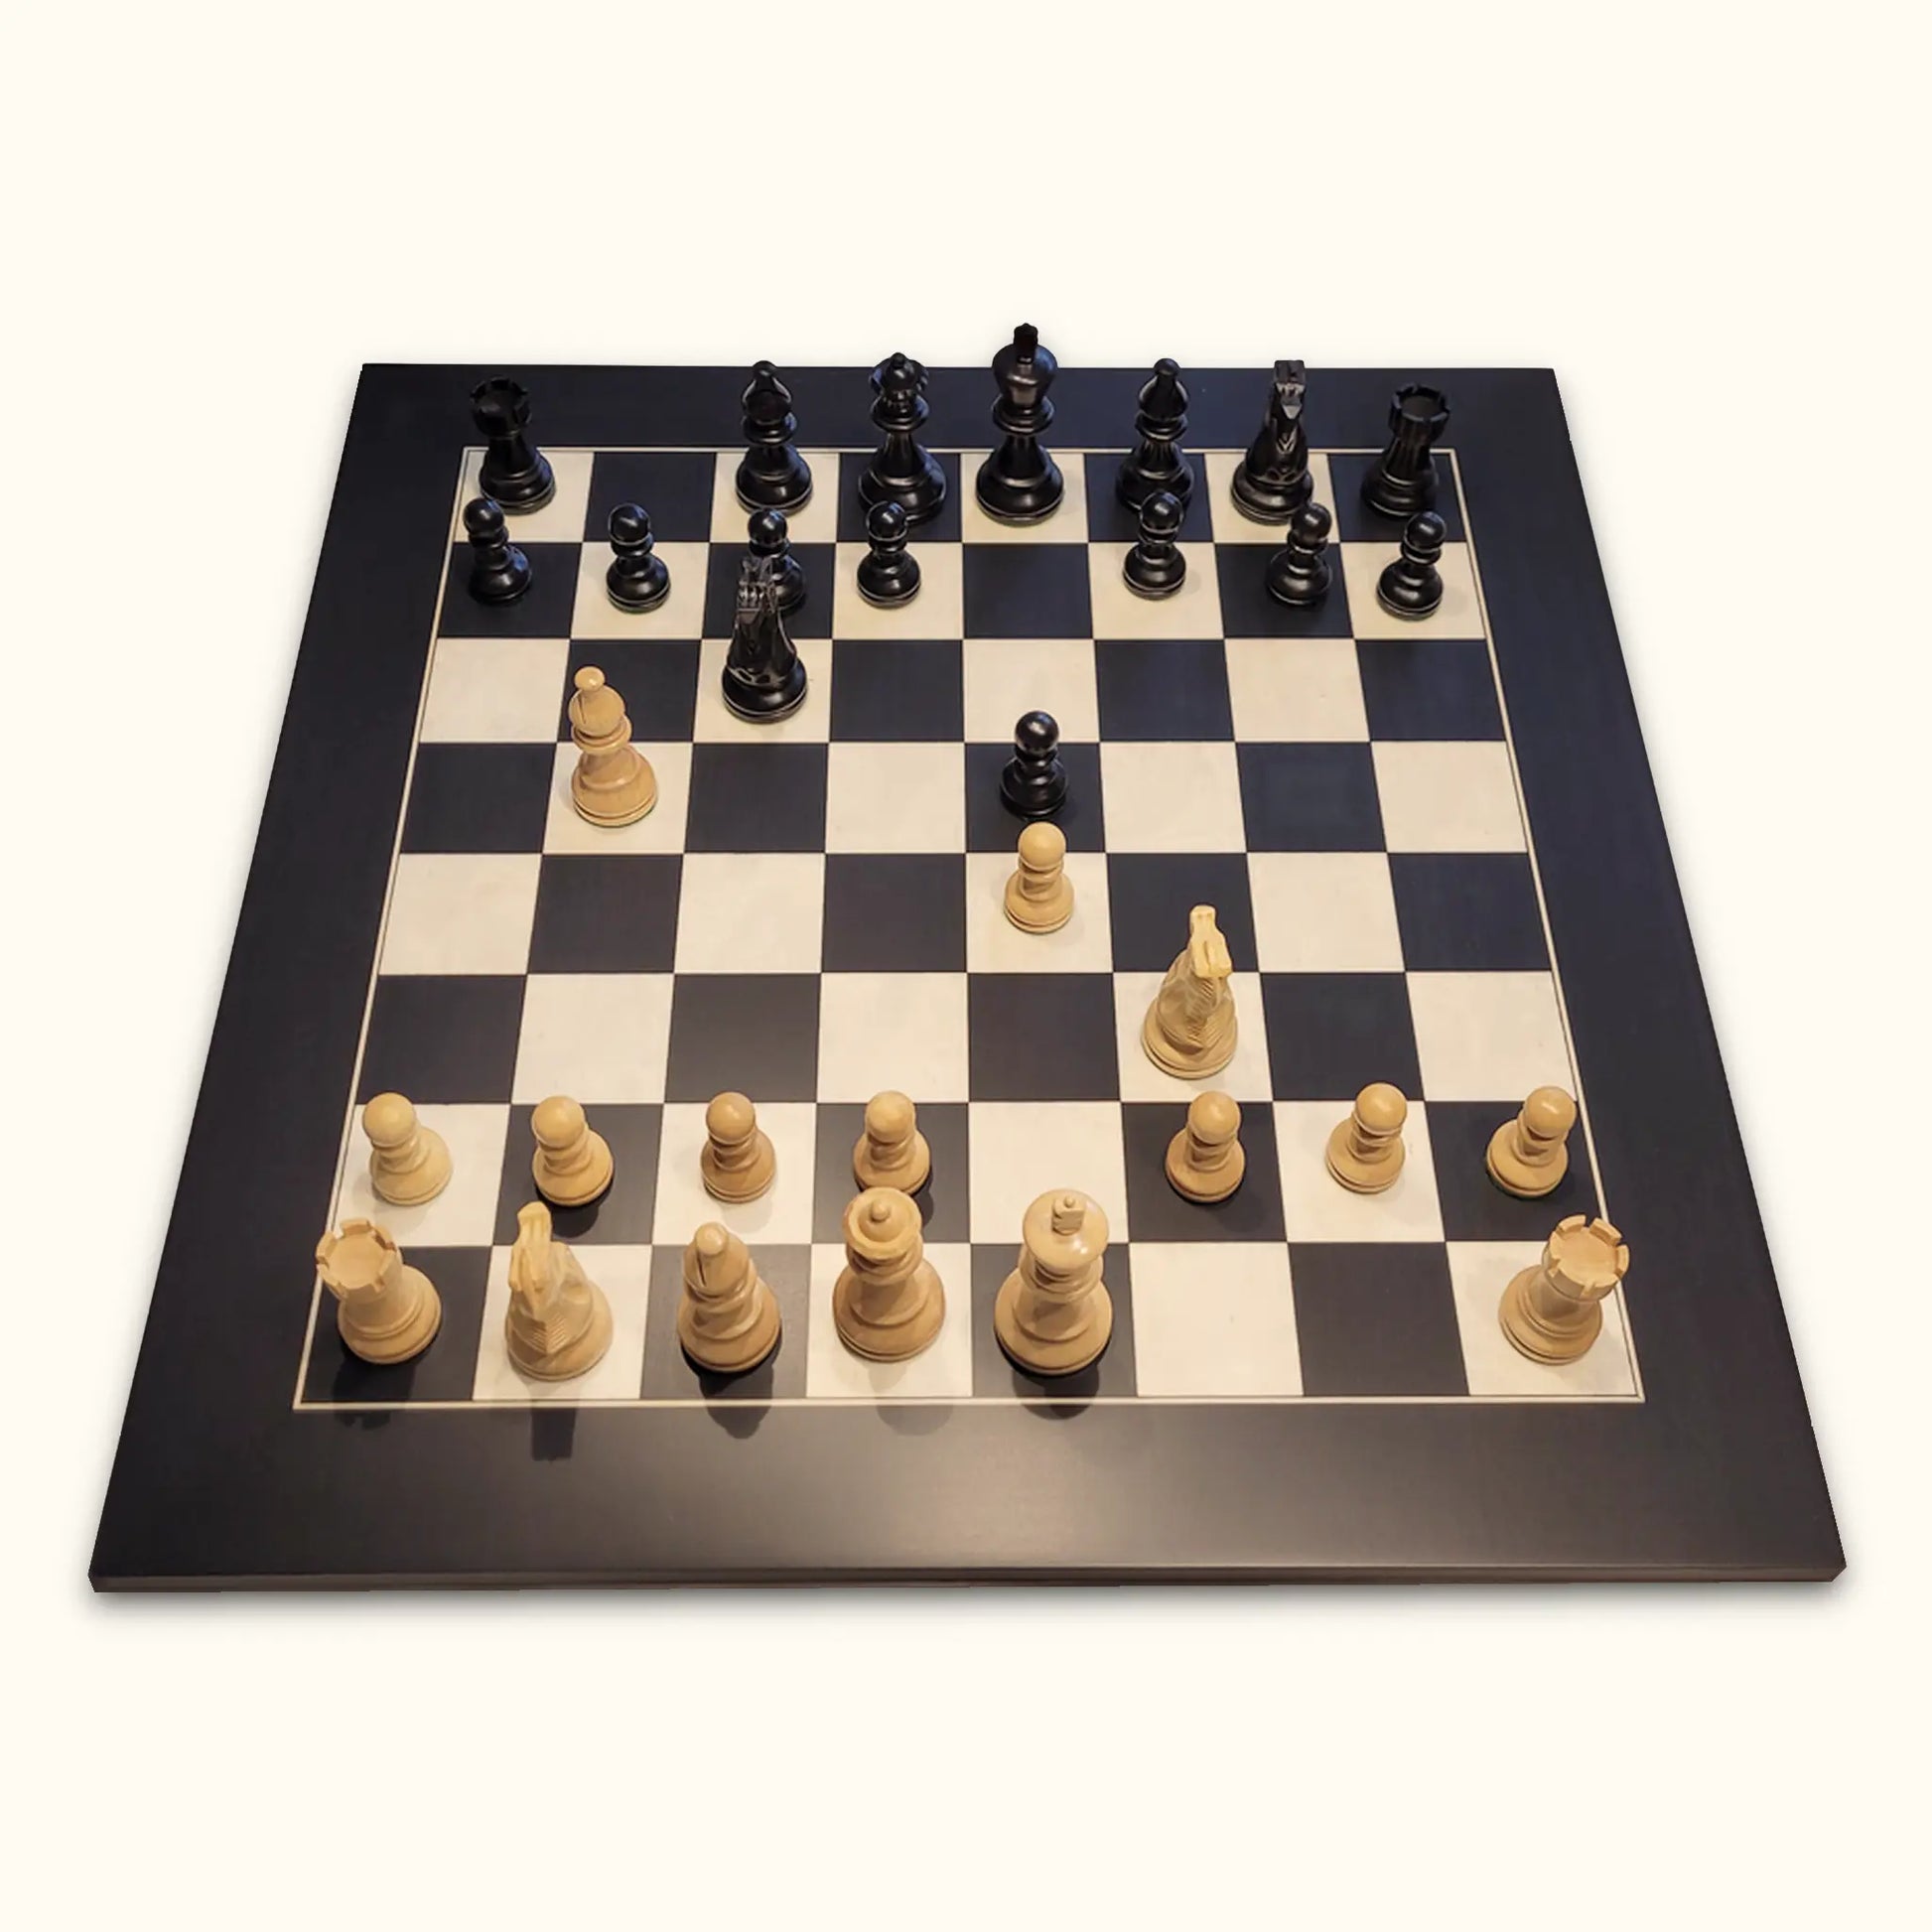 The English Playing Weighted Chess Pieces Set in Ebony Wood, Extra